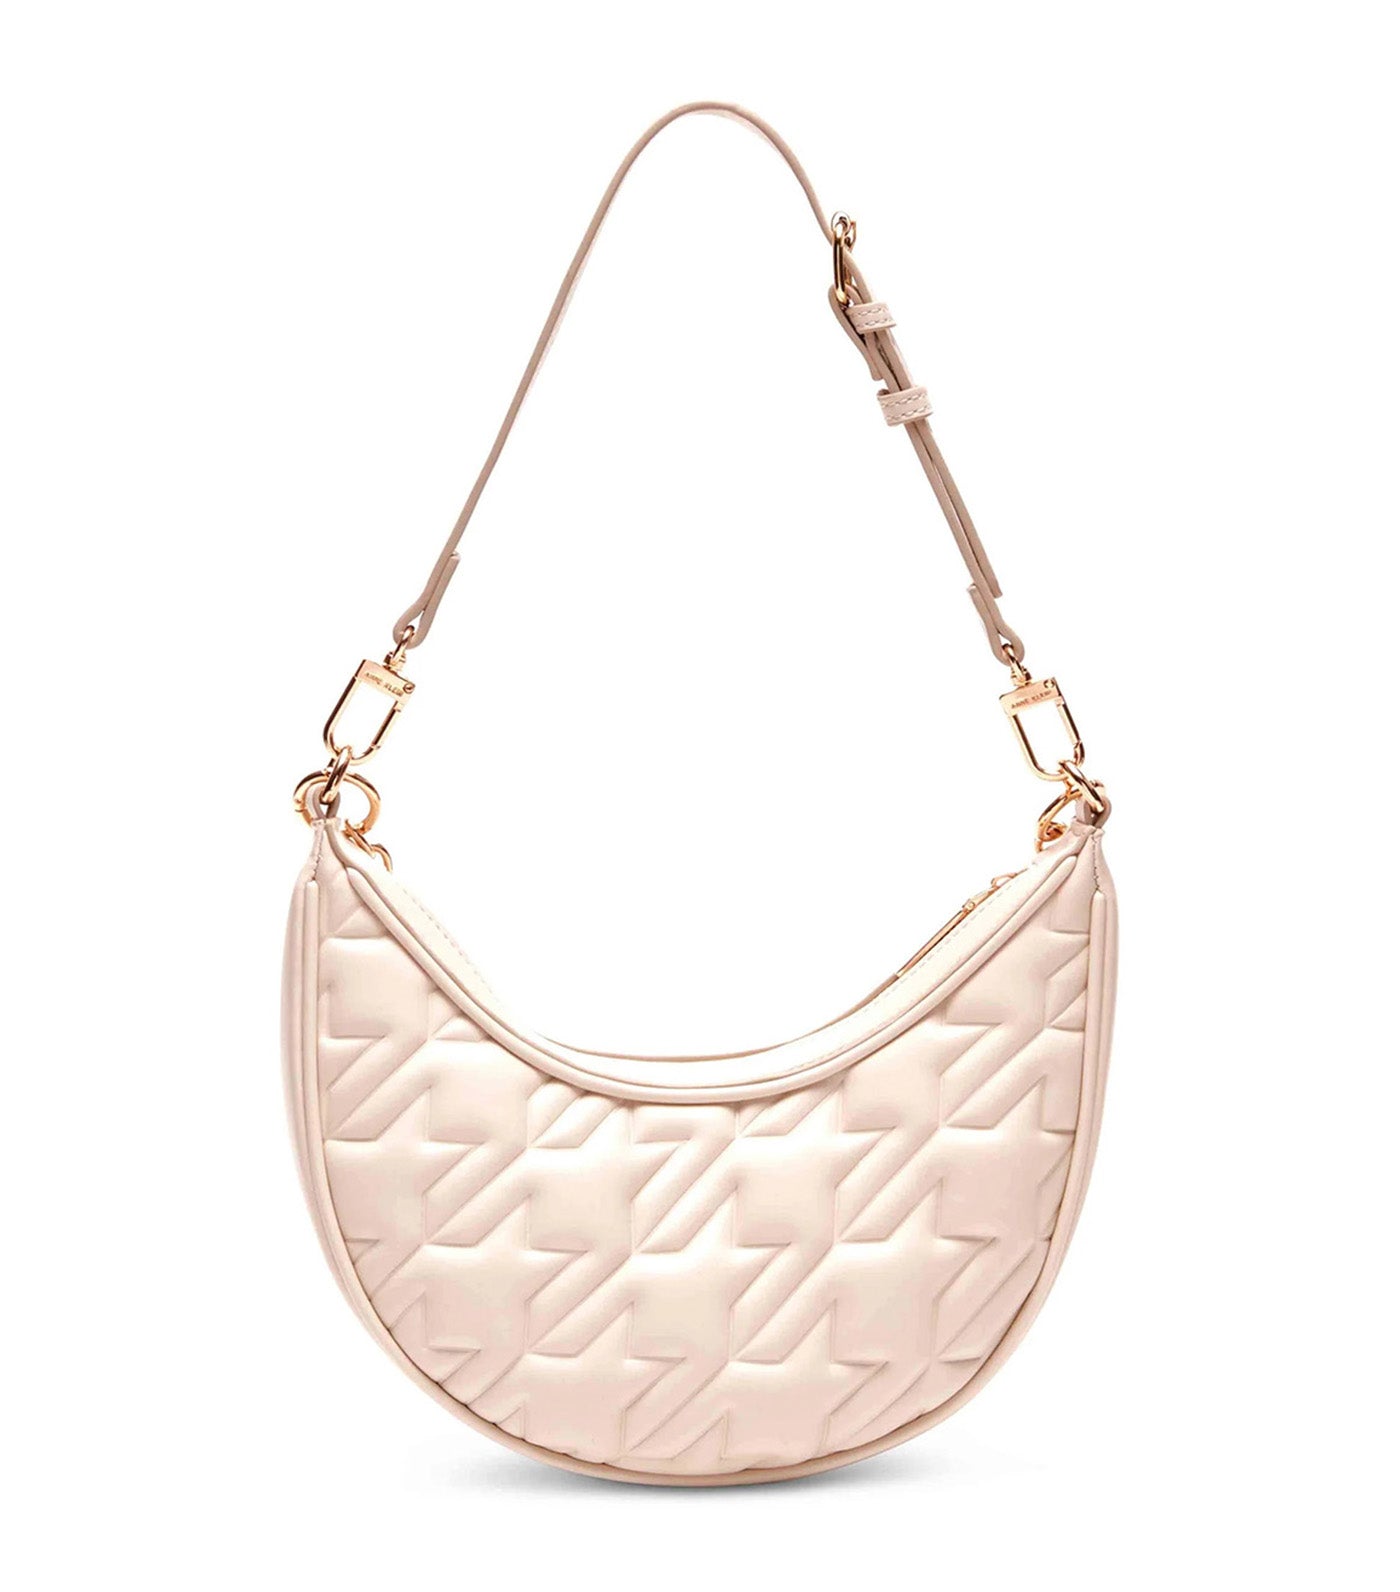 Crescent Shoulder Bag with Swag Chain in Pressed Houndstooth Latte